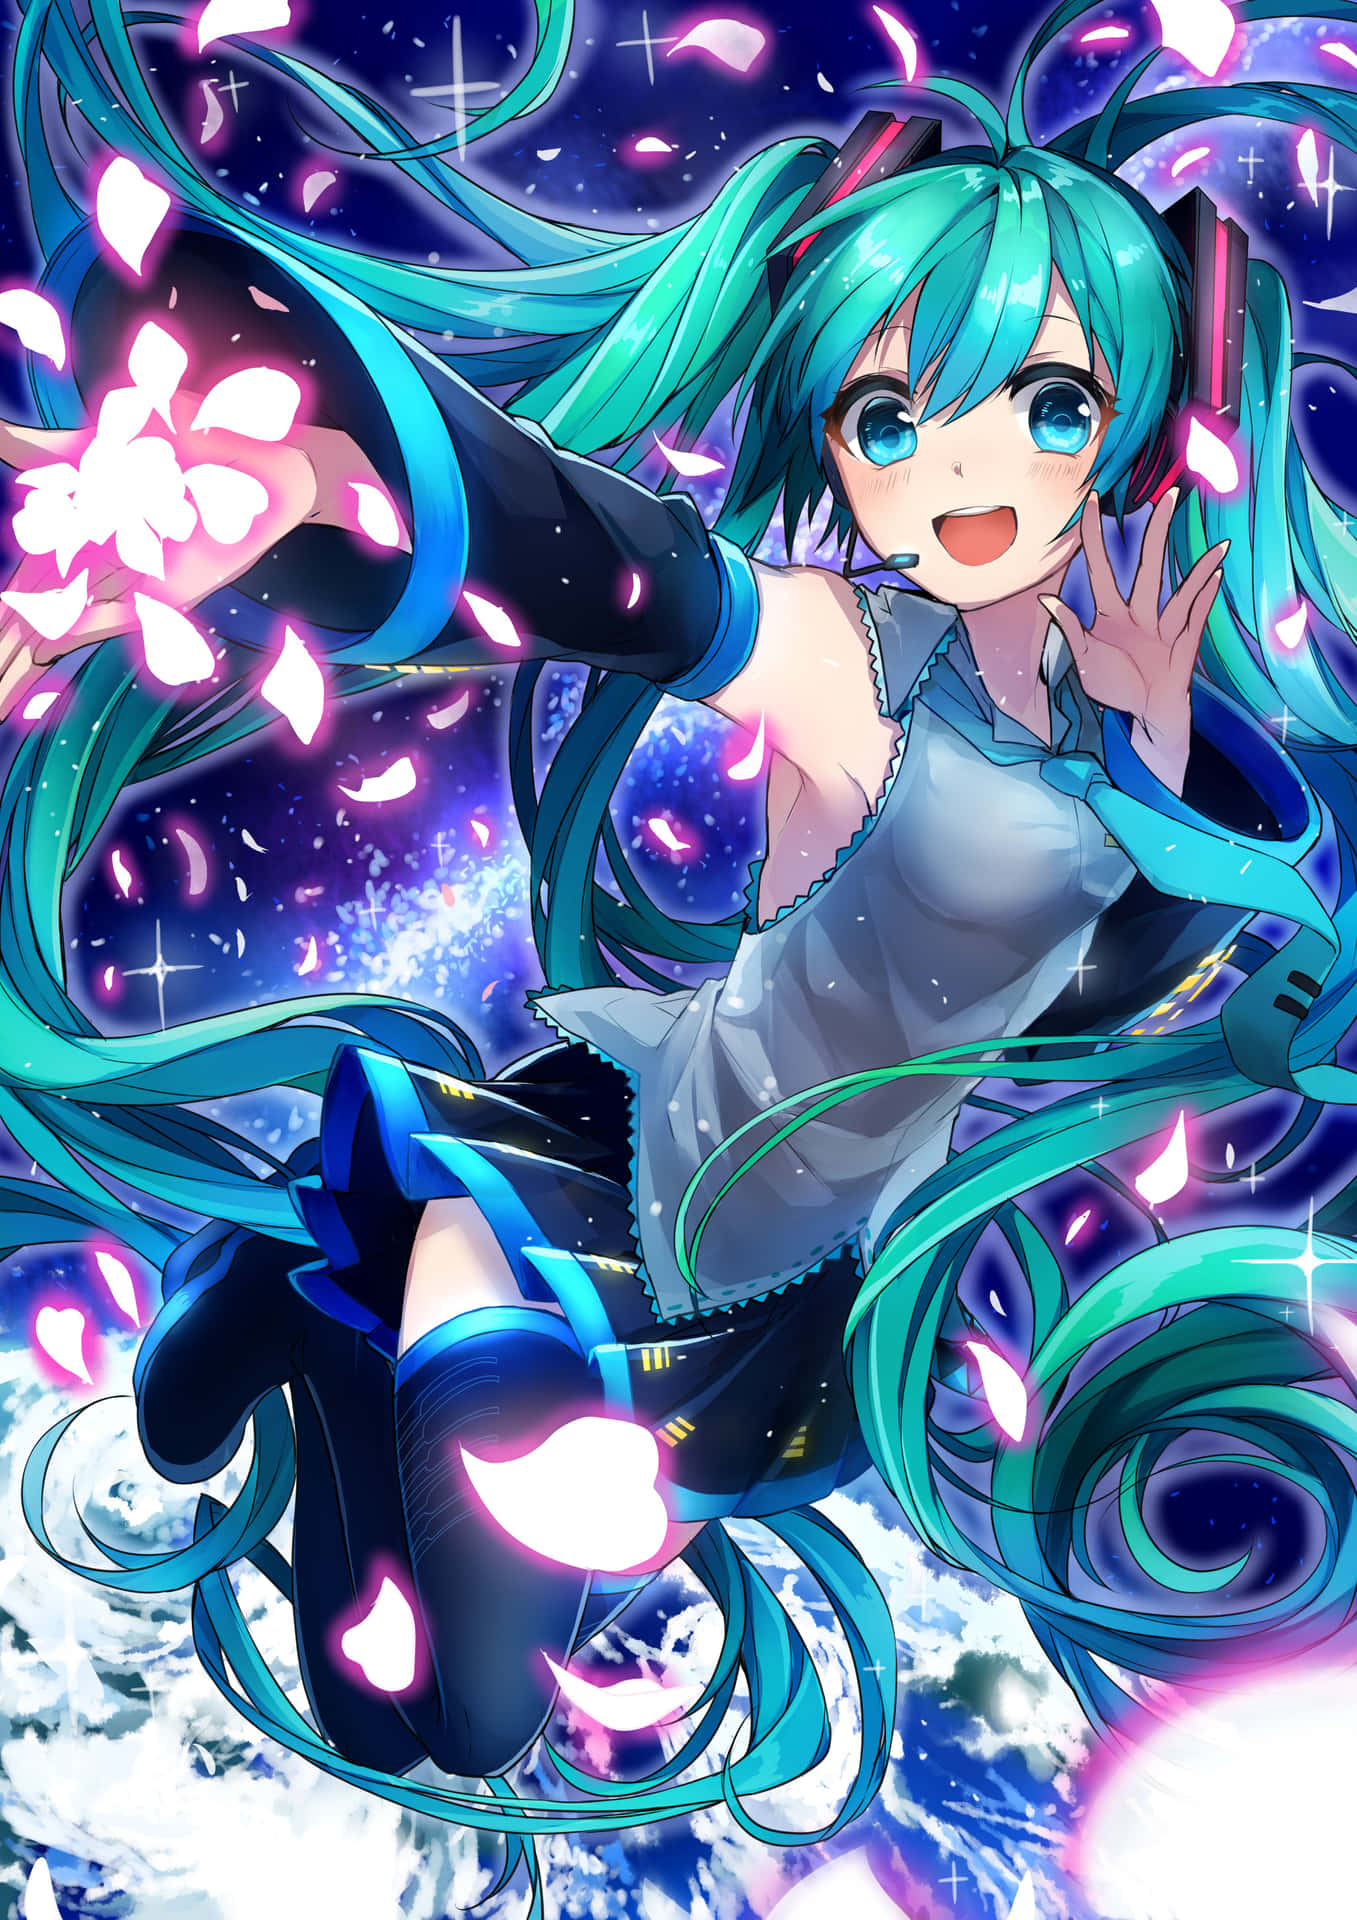 Get Ready to Take Your Anime Obsession Anywhere with Hatsune Miku's Very Own Phone Wallpaper